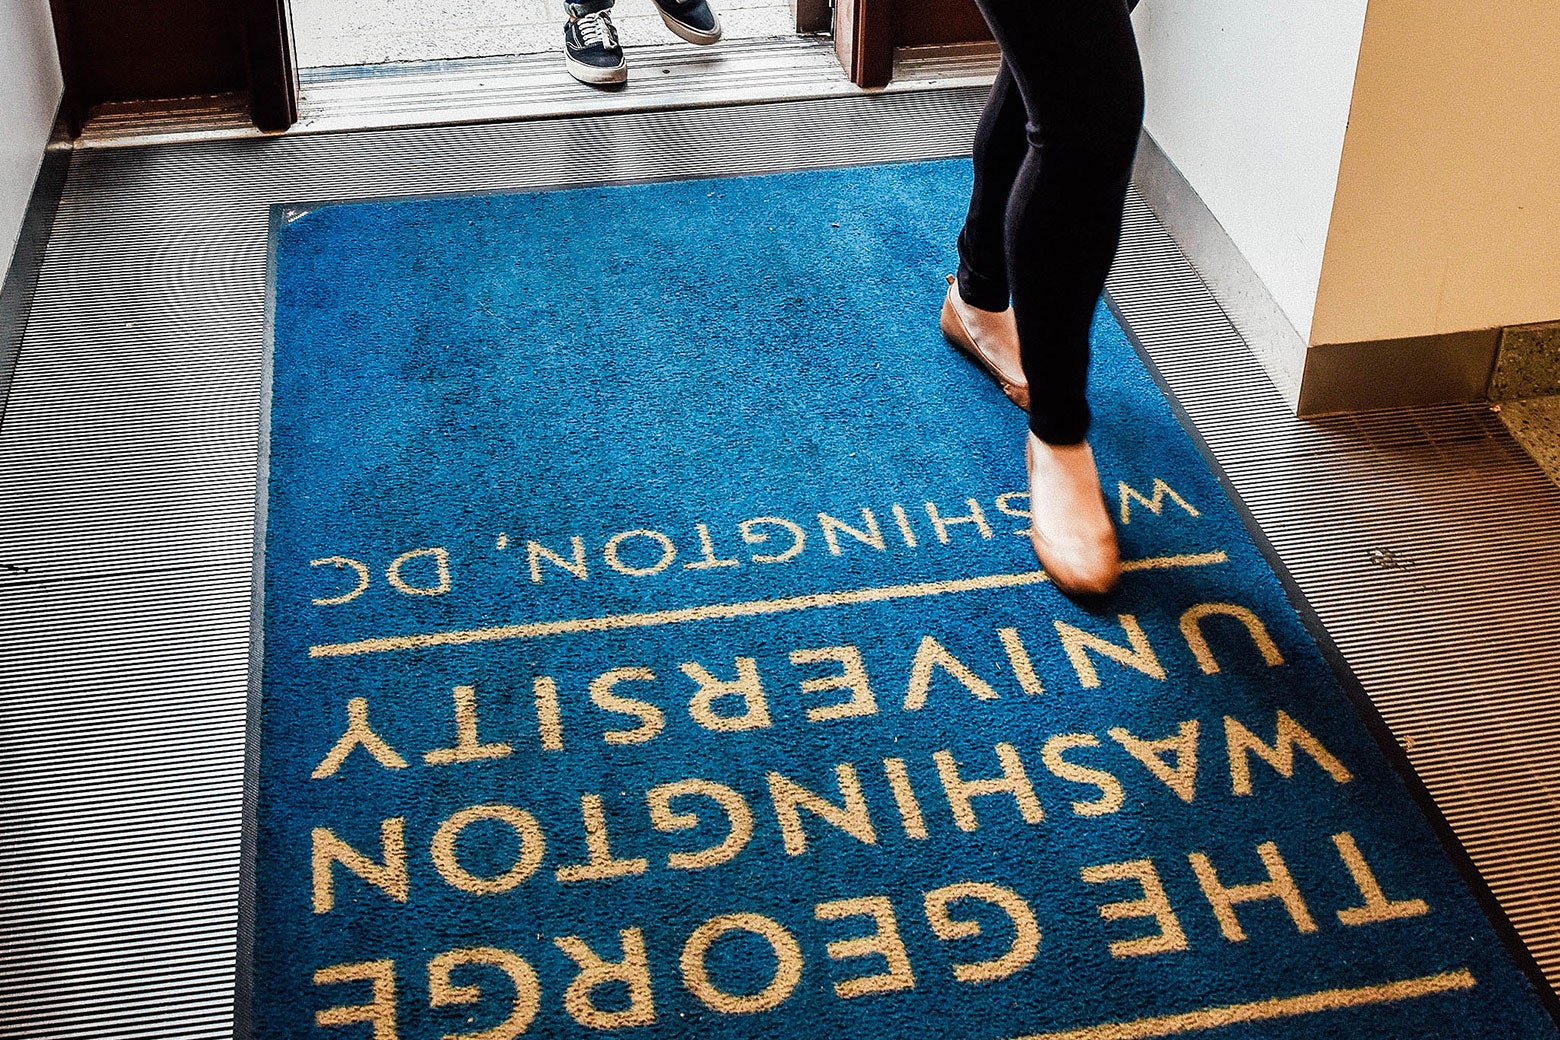 Admitted George Washington University students and their parents walk across a branded doormat as they tour the campus before deciding whether or not to enroll on April 26, 2017, in Washington.